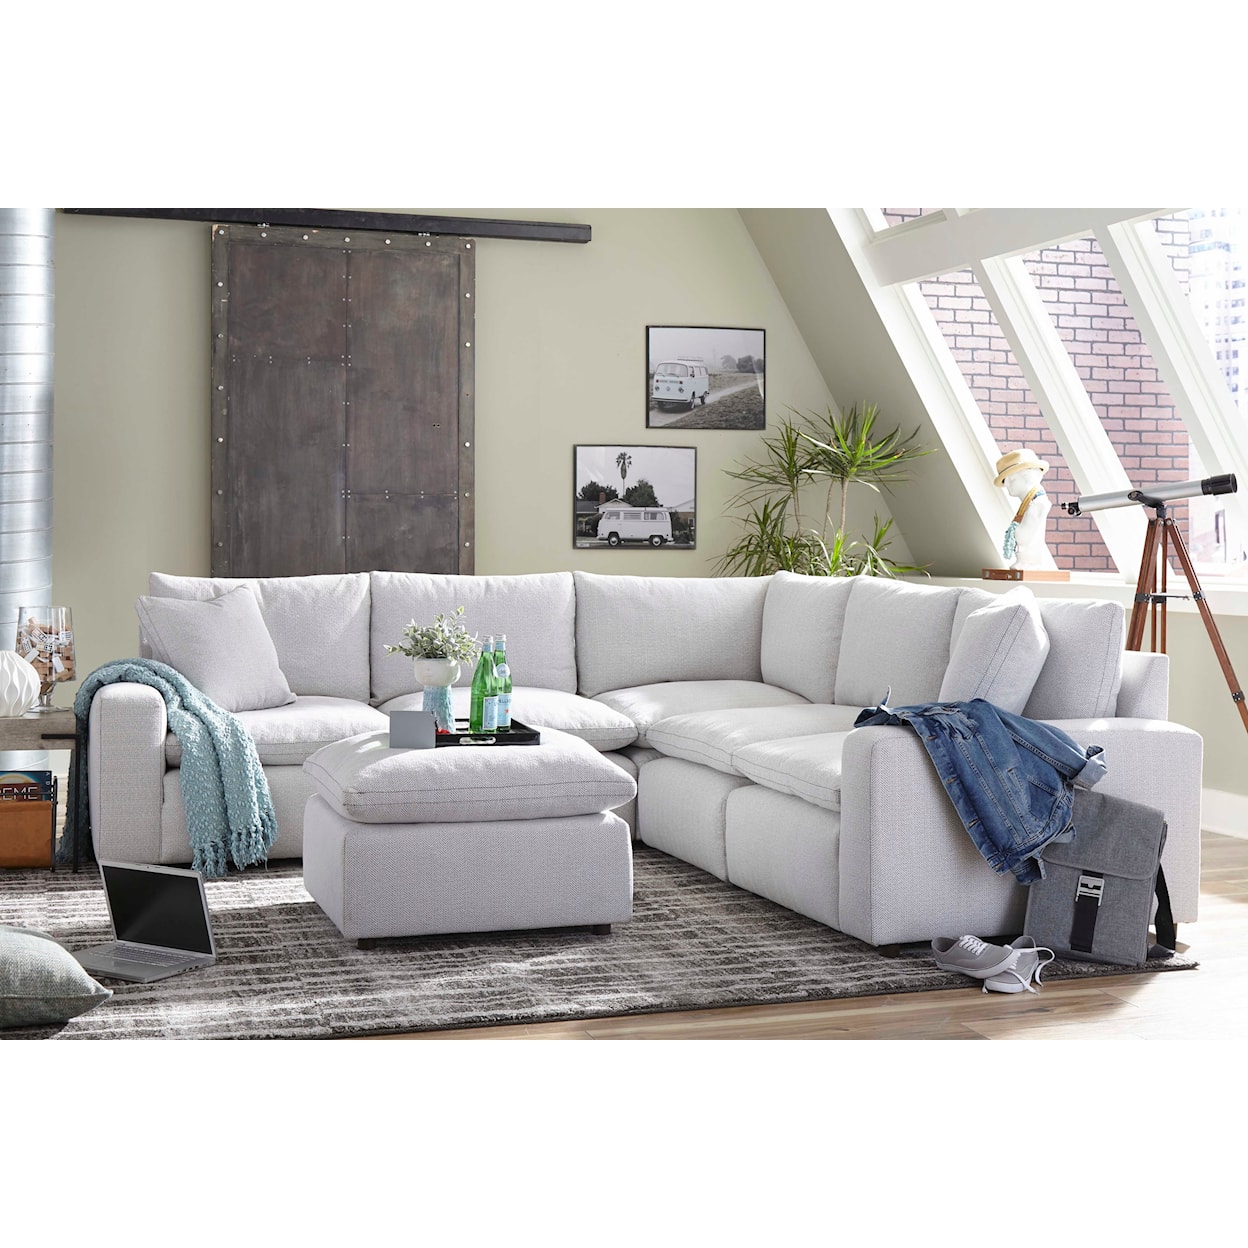 Behold Home 4000 Diesel Sectional Sofa